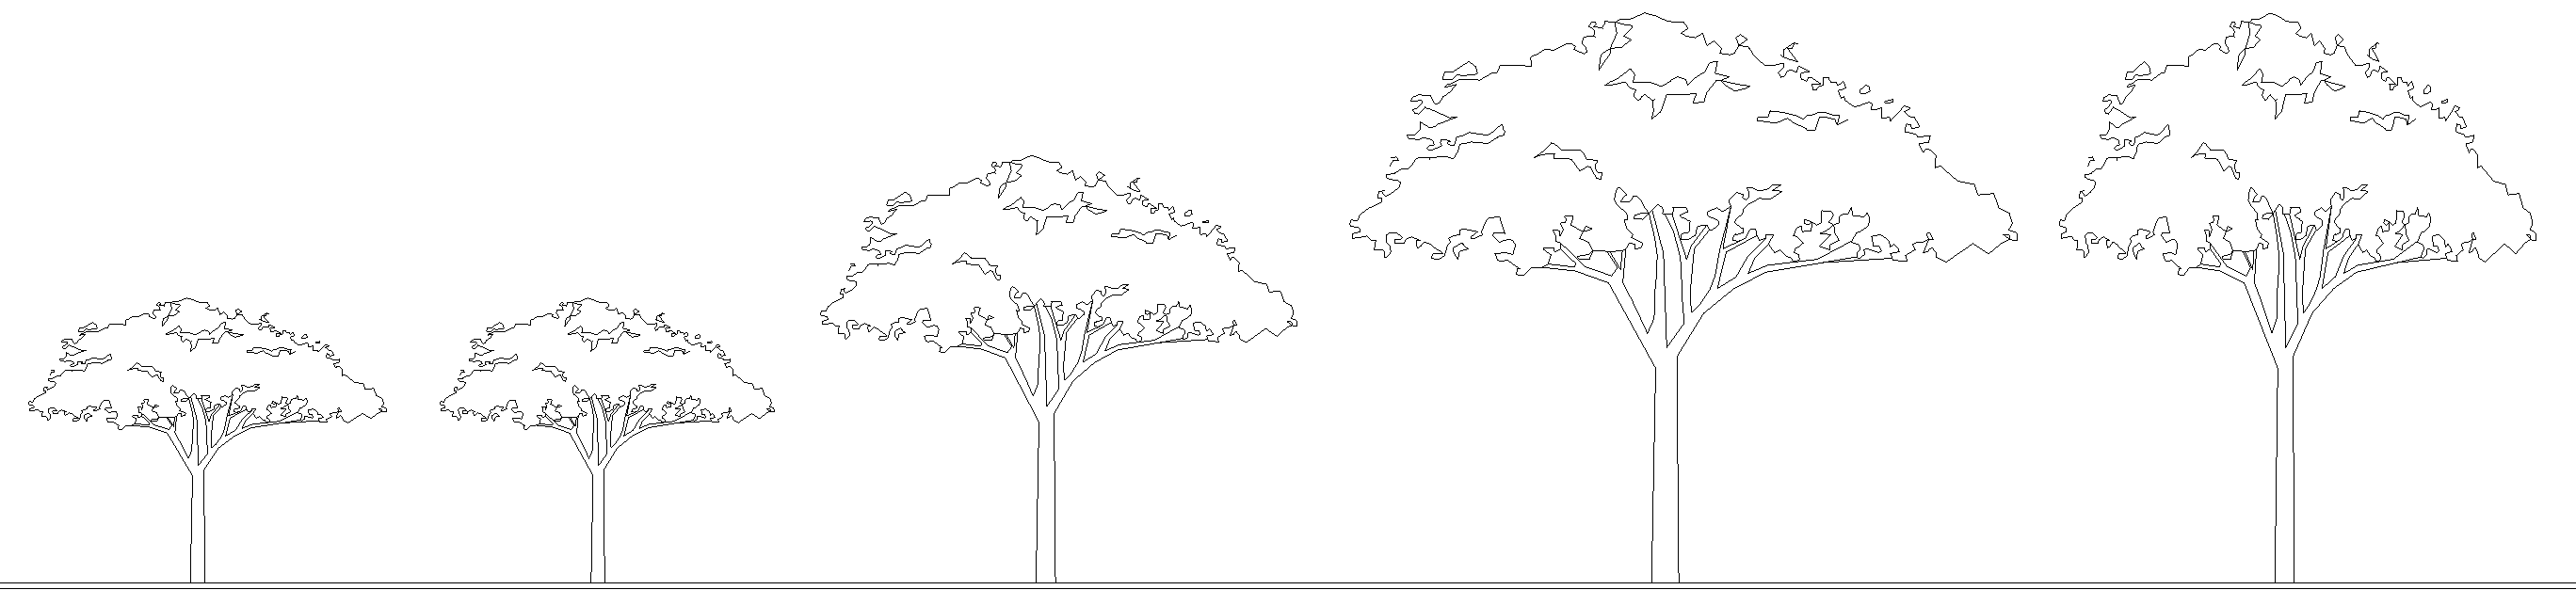 Revit elevation showing the scaling of crown diameter for umbrella trees.